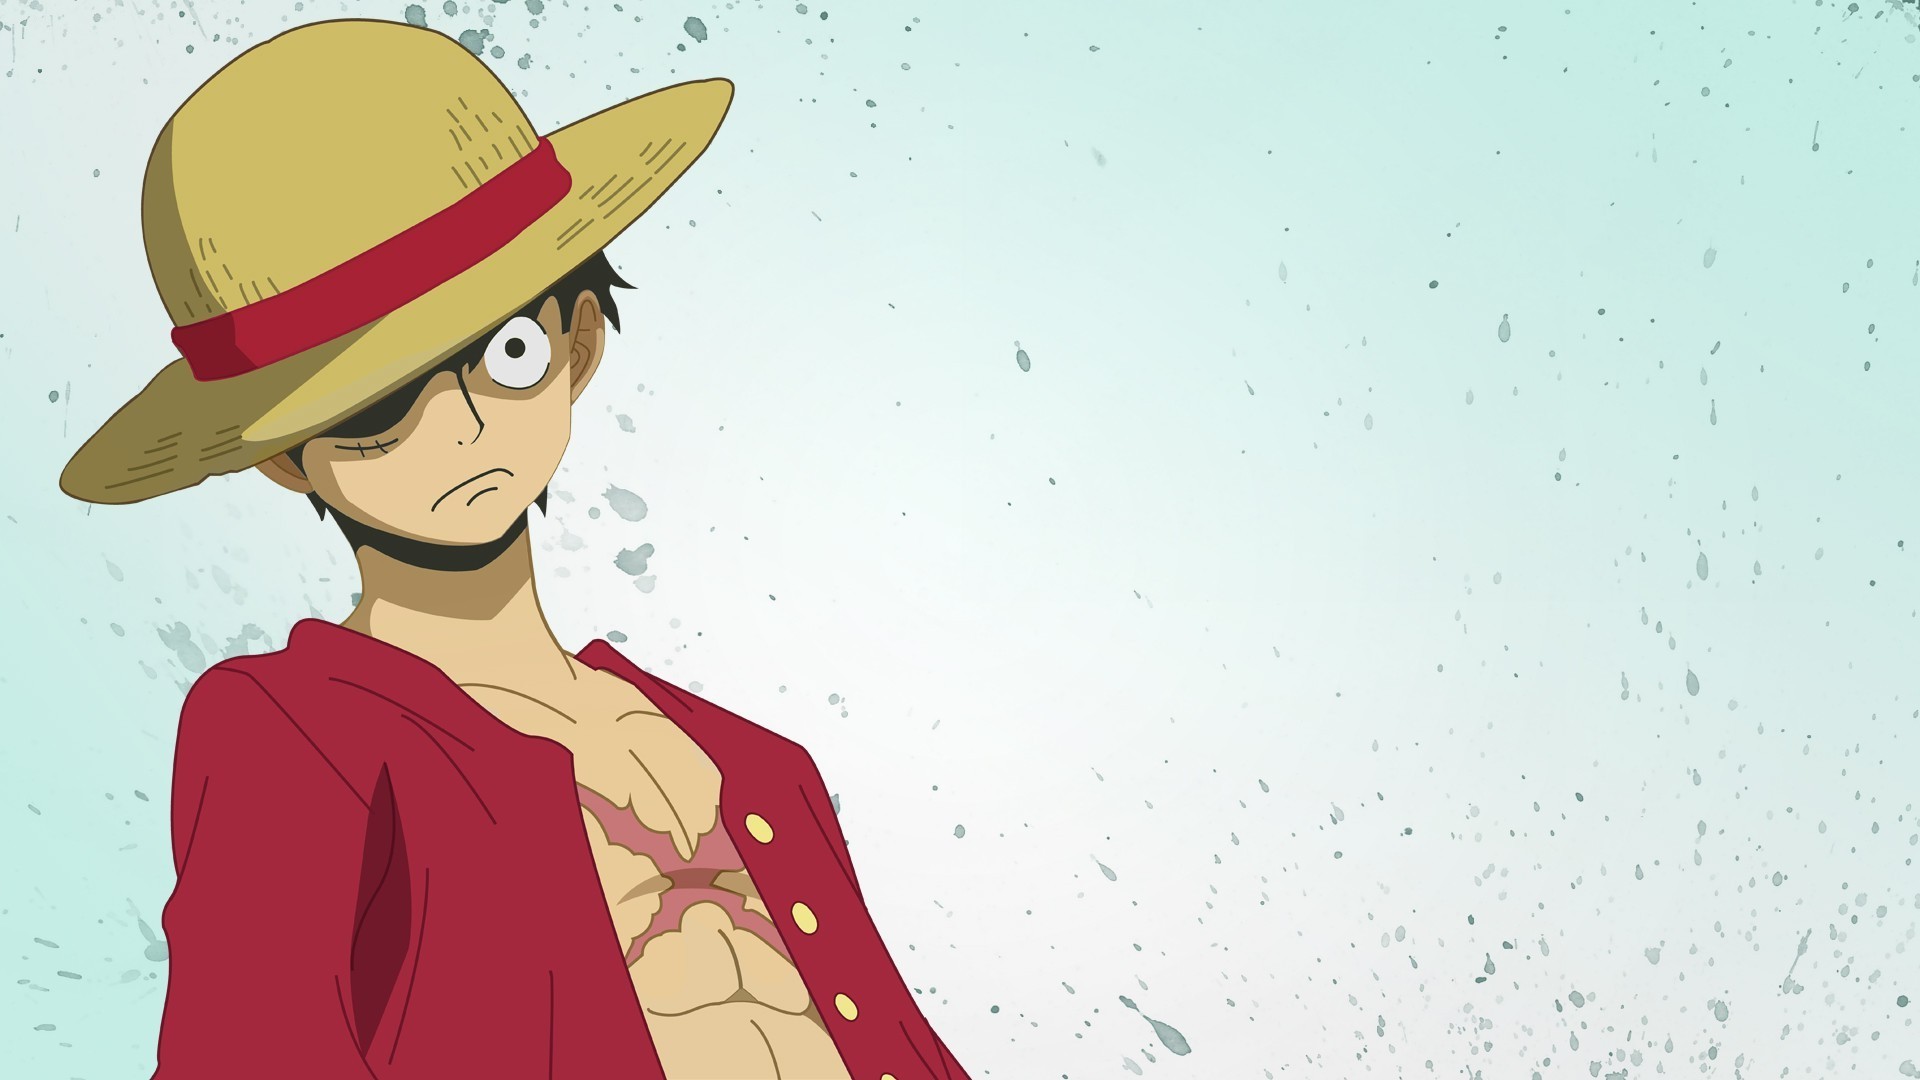 One Piece Wallpapers Hd Desktop And Mobile Backgrounds Images, Photos, Reviews